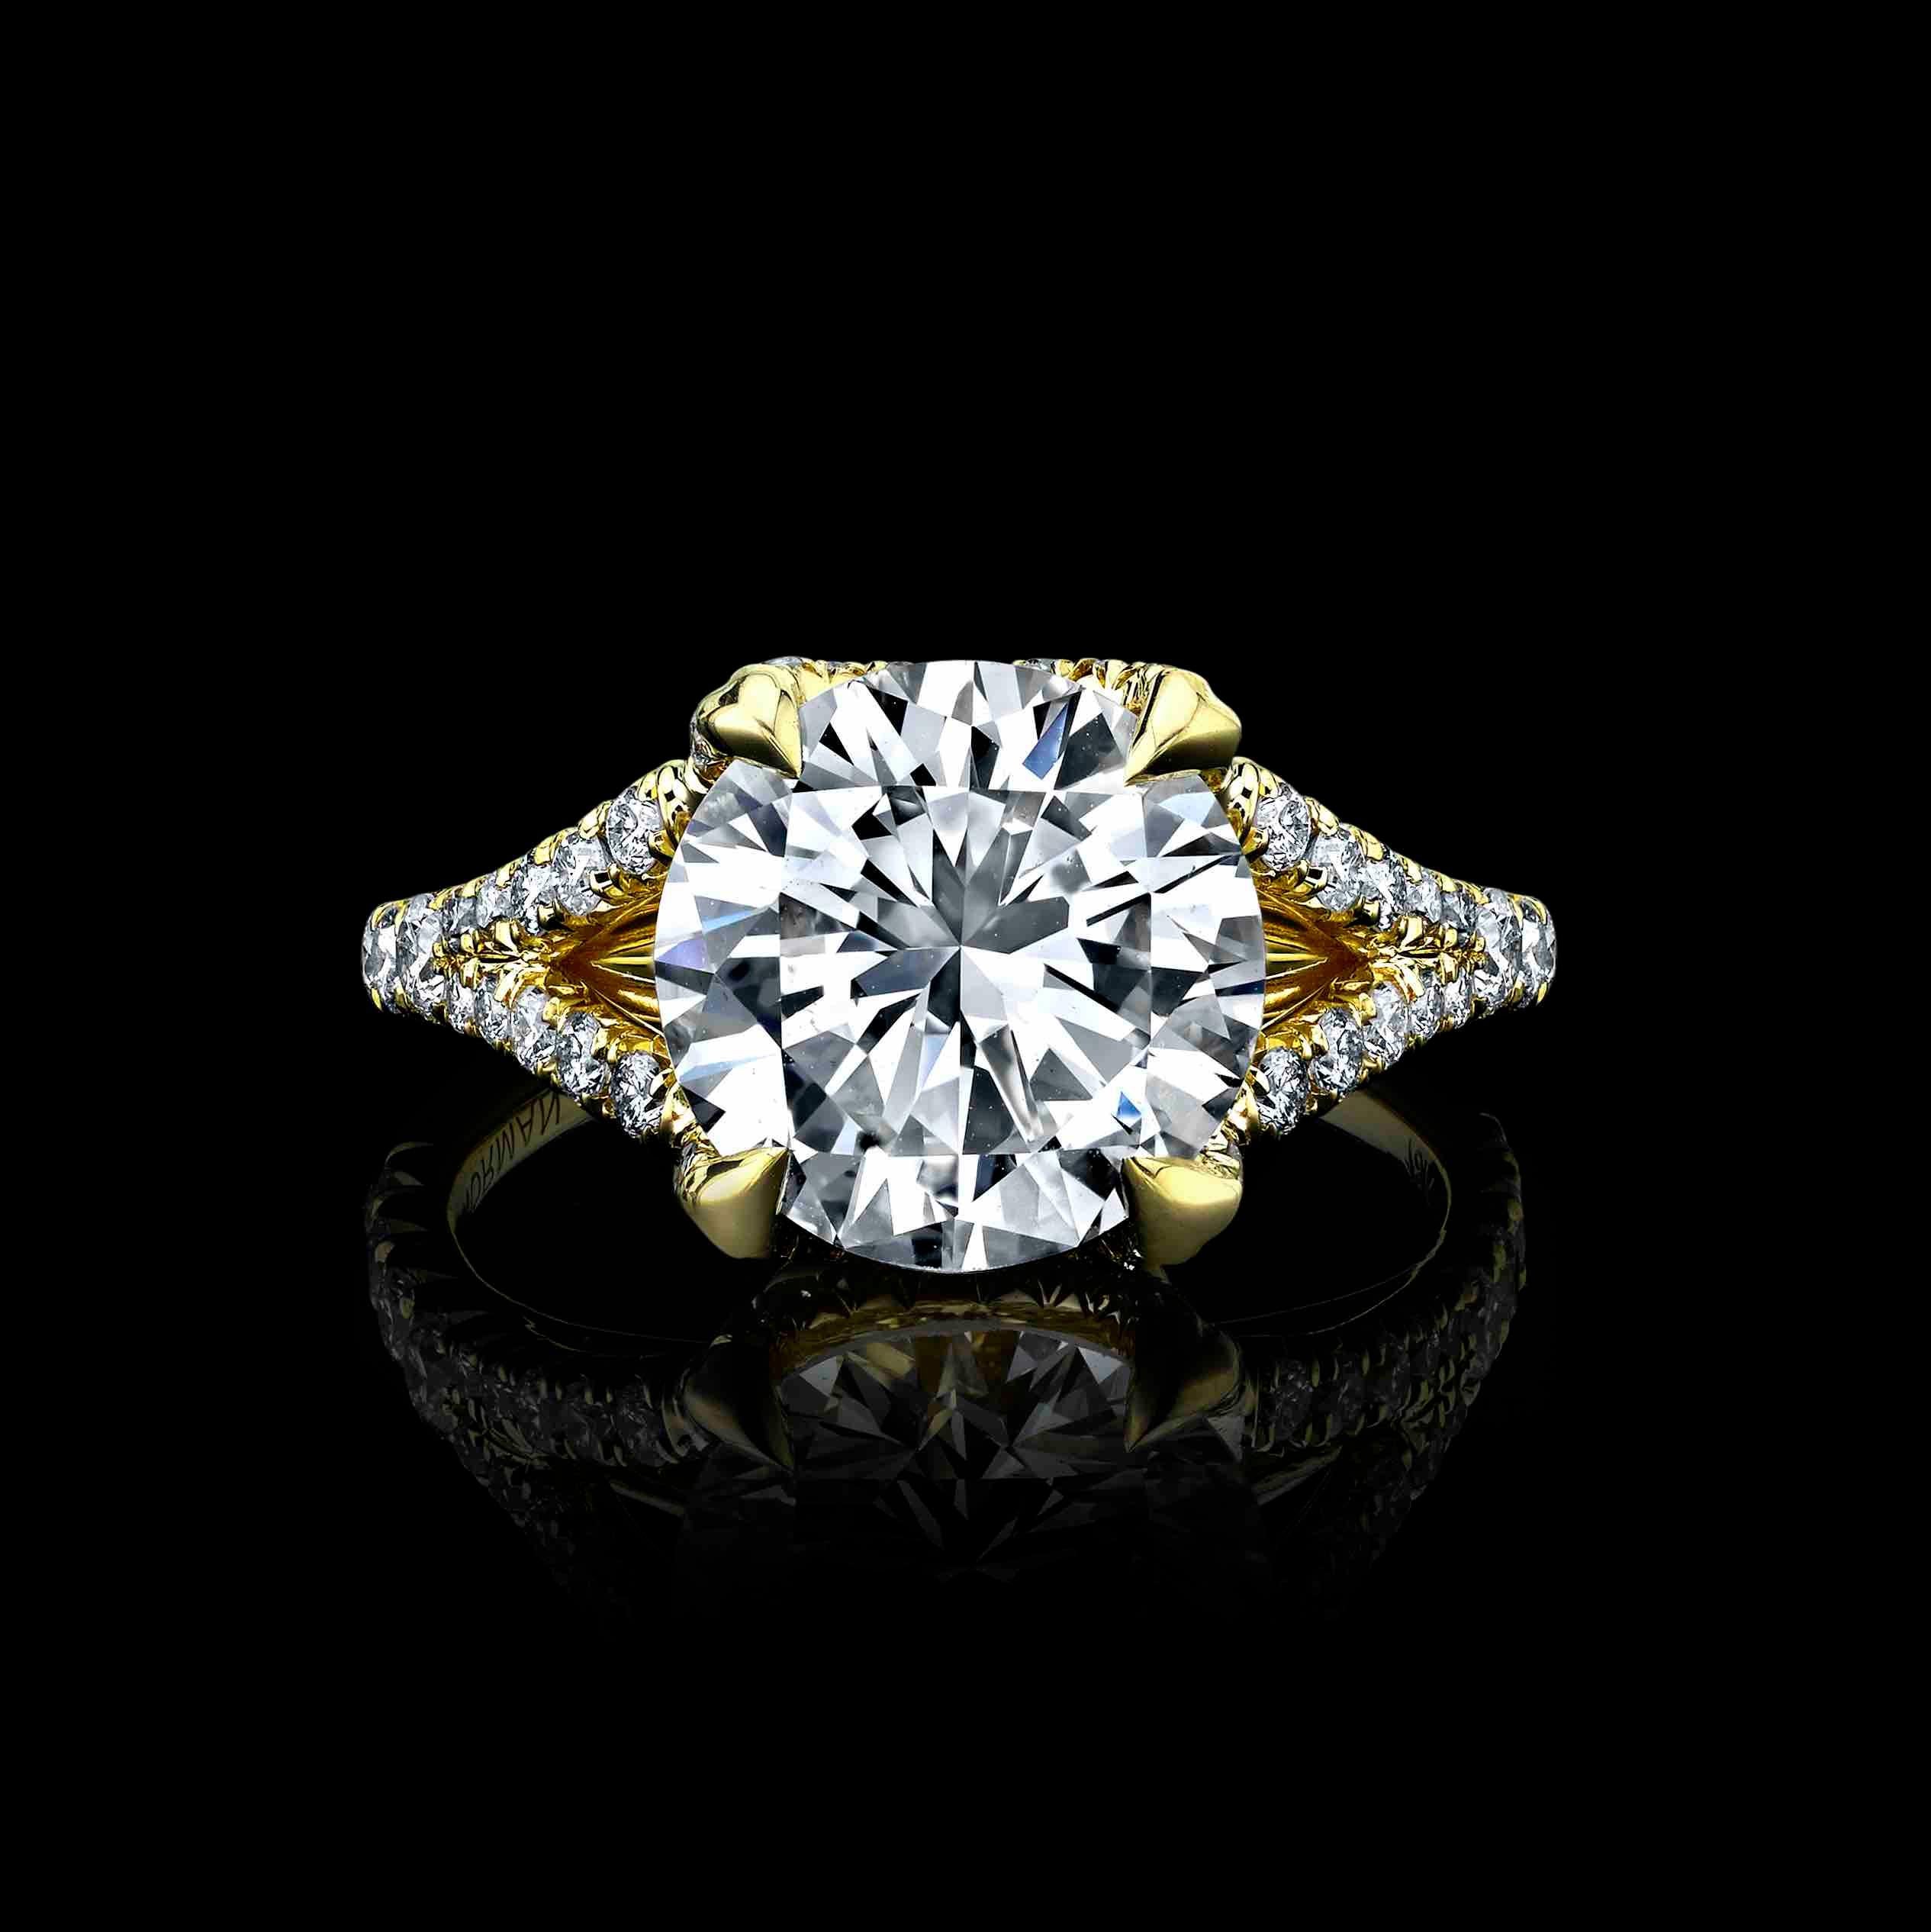 A beautiful 3.98ct, L Color, and SI1 clarity diamond, set in 18K gold ring with 1.00cttw melee round diamonds 
This Diamond is GIA certified #5211433618